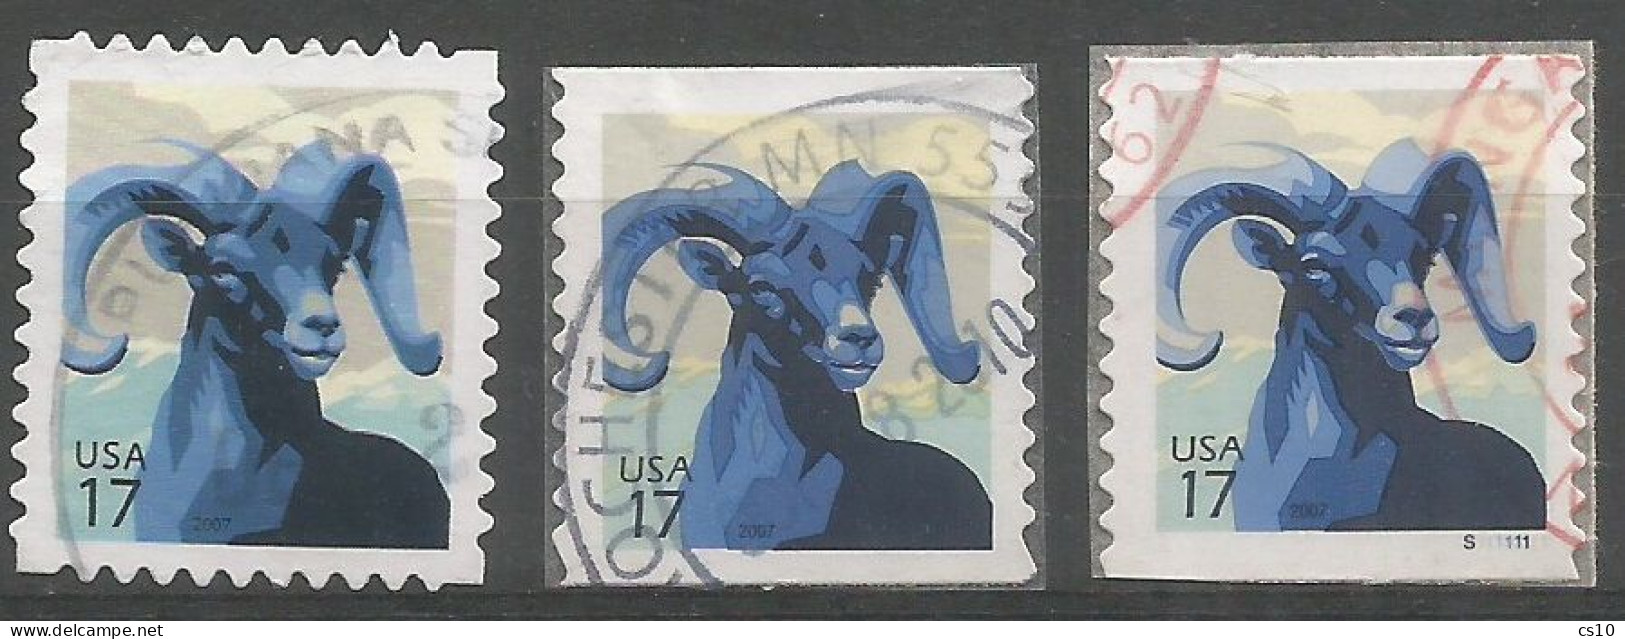 USA 2007 Bighorn Sheep C.17 - SC.#4138 Sheets + SC.#4140 Coil + Coil Plate Number  - Cpl 3v Set In VFU Condition - Coils (Plate Numbers)